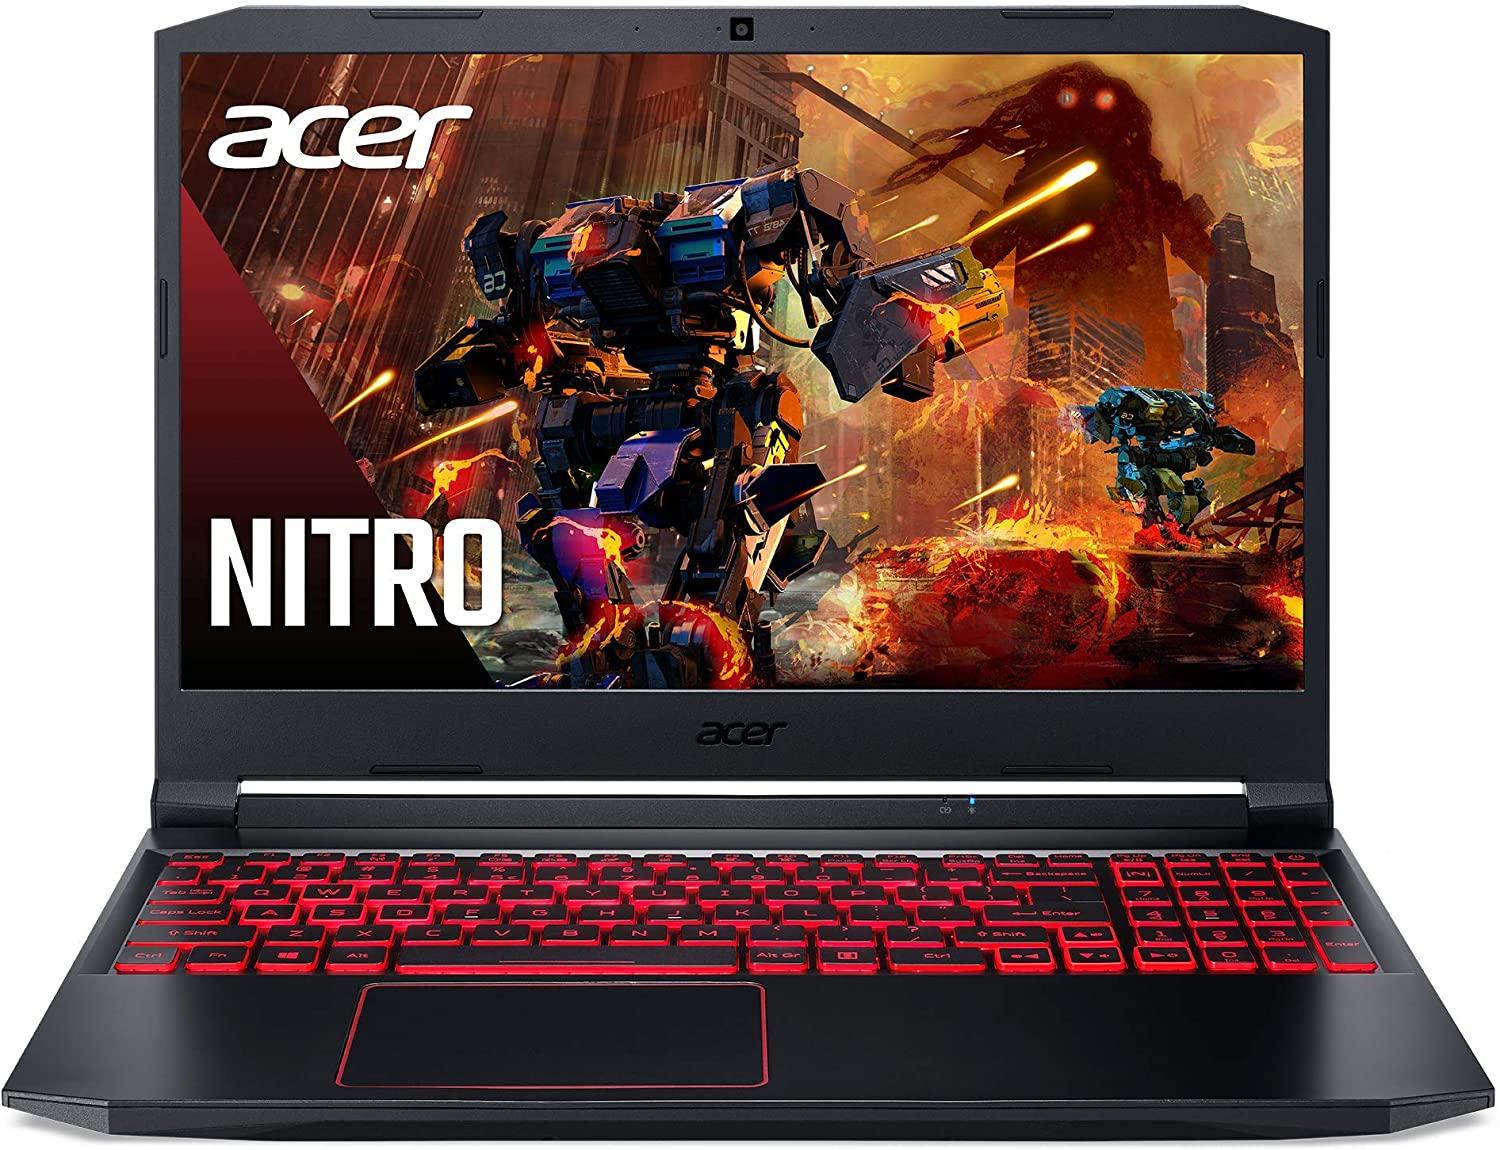 Acer Nitro 5 15.6in i5 8GB Gaming Laptop for $669.99 Shipped